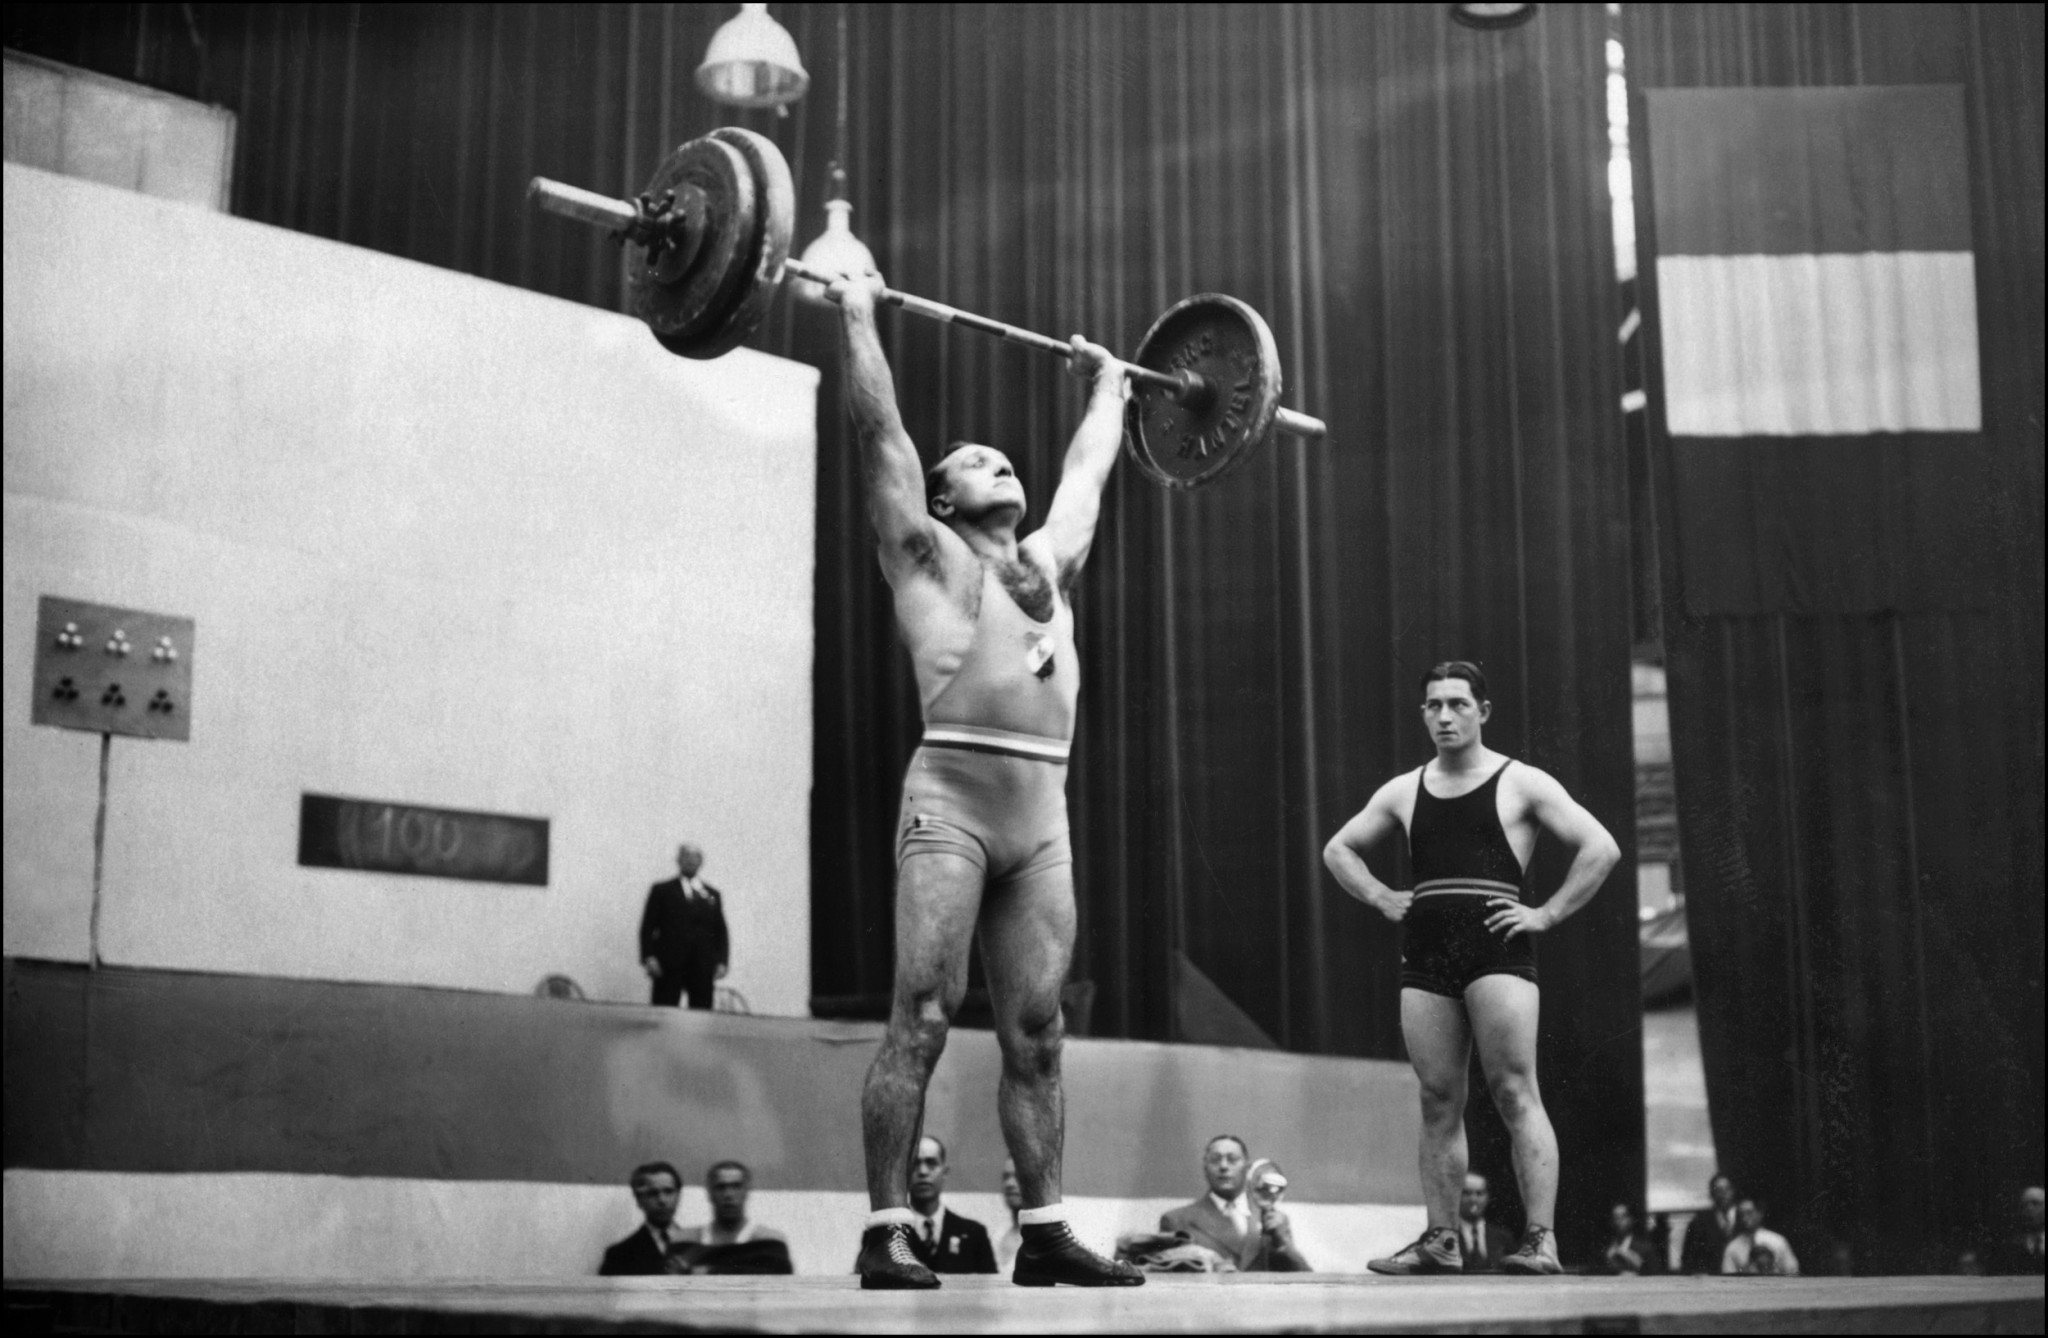 Louis Hostin, best French medal winner in his category, lift weight, 15 September 1937. After taking silver in the Light Heavyweight at the 1928 Olympics in Amsterdam, Hostin won two gold medals at the 1932 los Angeles Olympics and 1936 Berlin Olympics. He was also European champion in 1930 and 1935 and world vice-champion in 1937. Photo credit AFP/AFP via Getty Images.